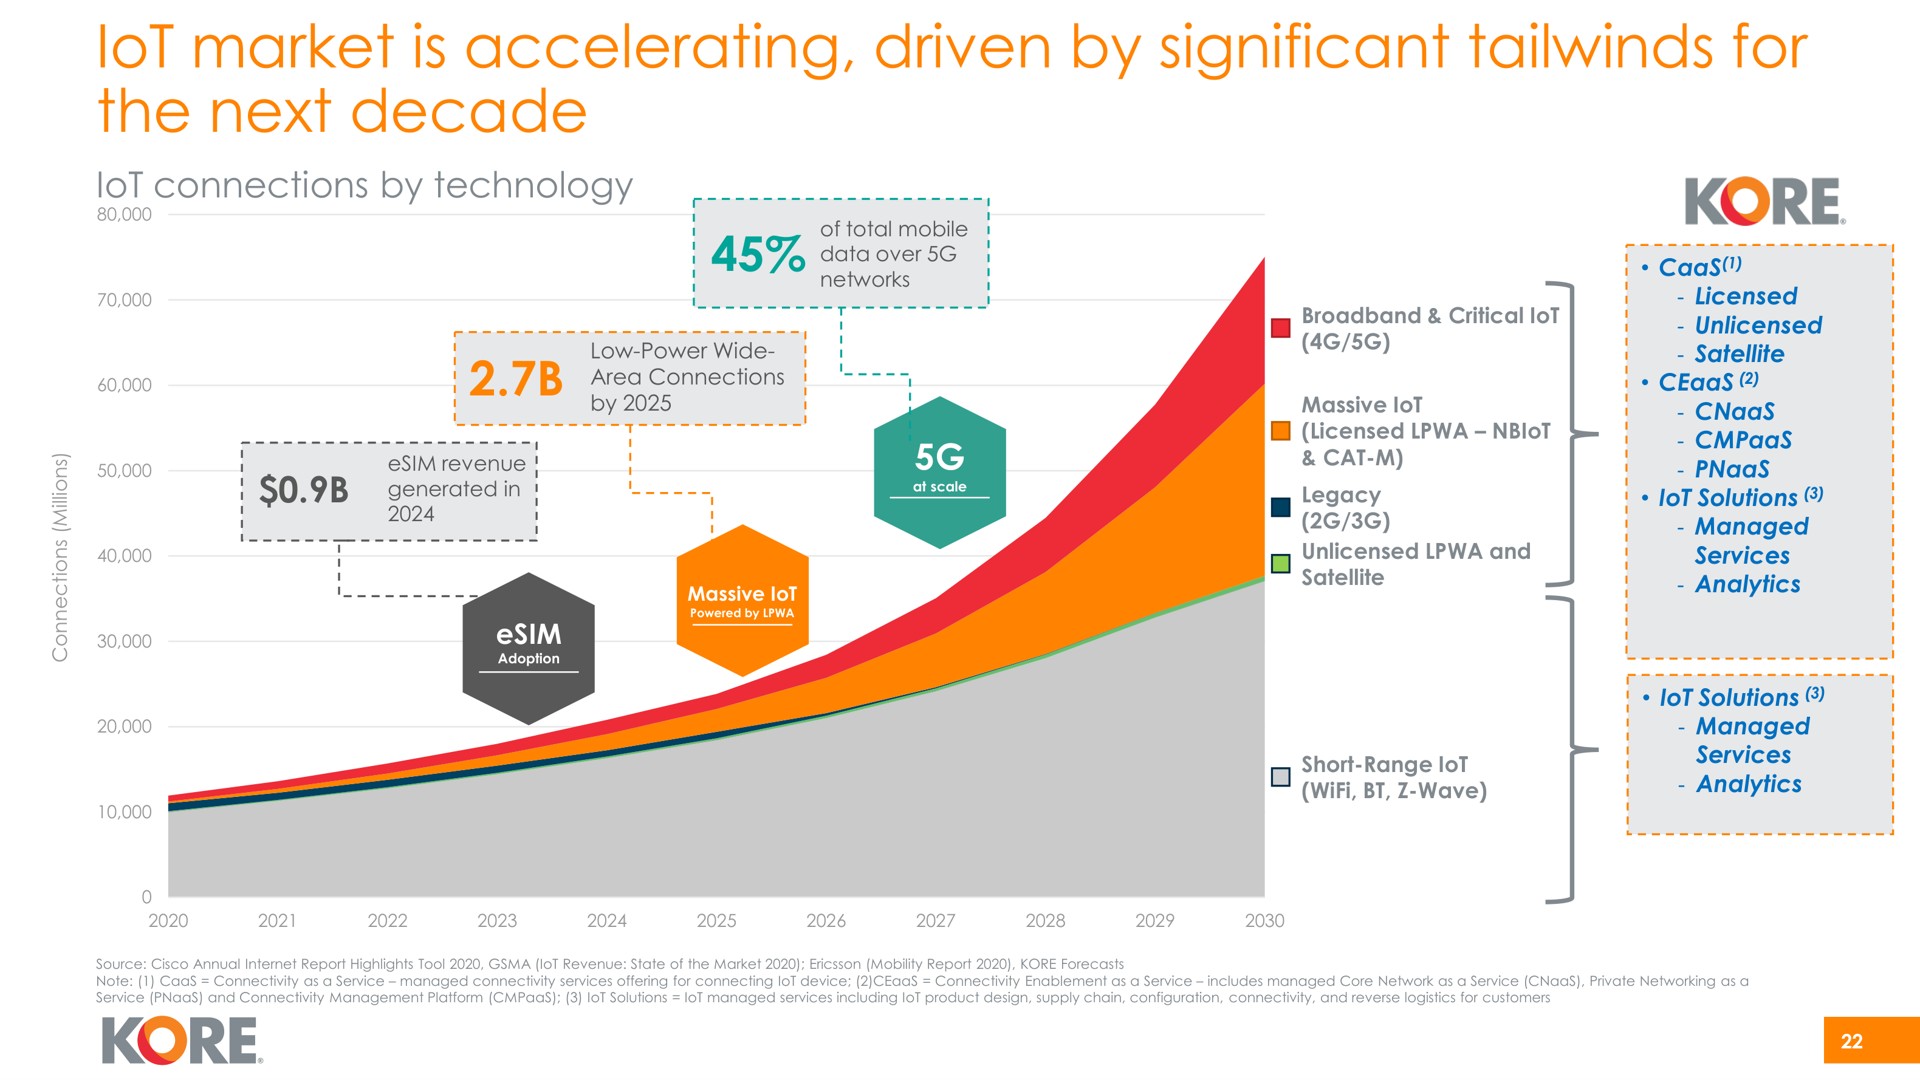 market is accelerating driven by significant for the next decade kore | Kore